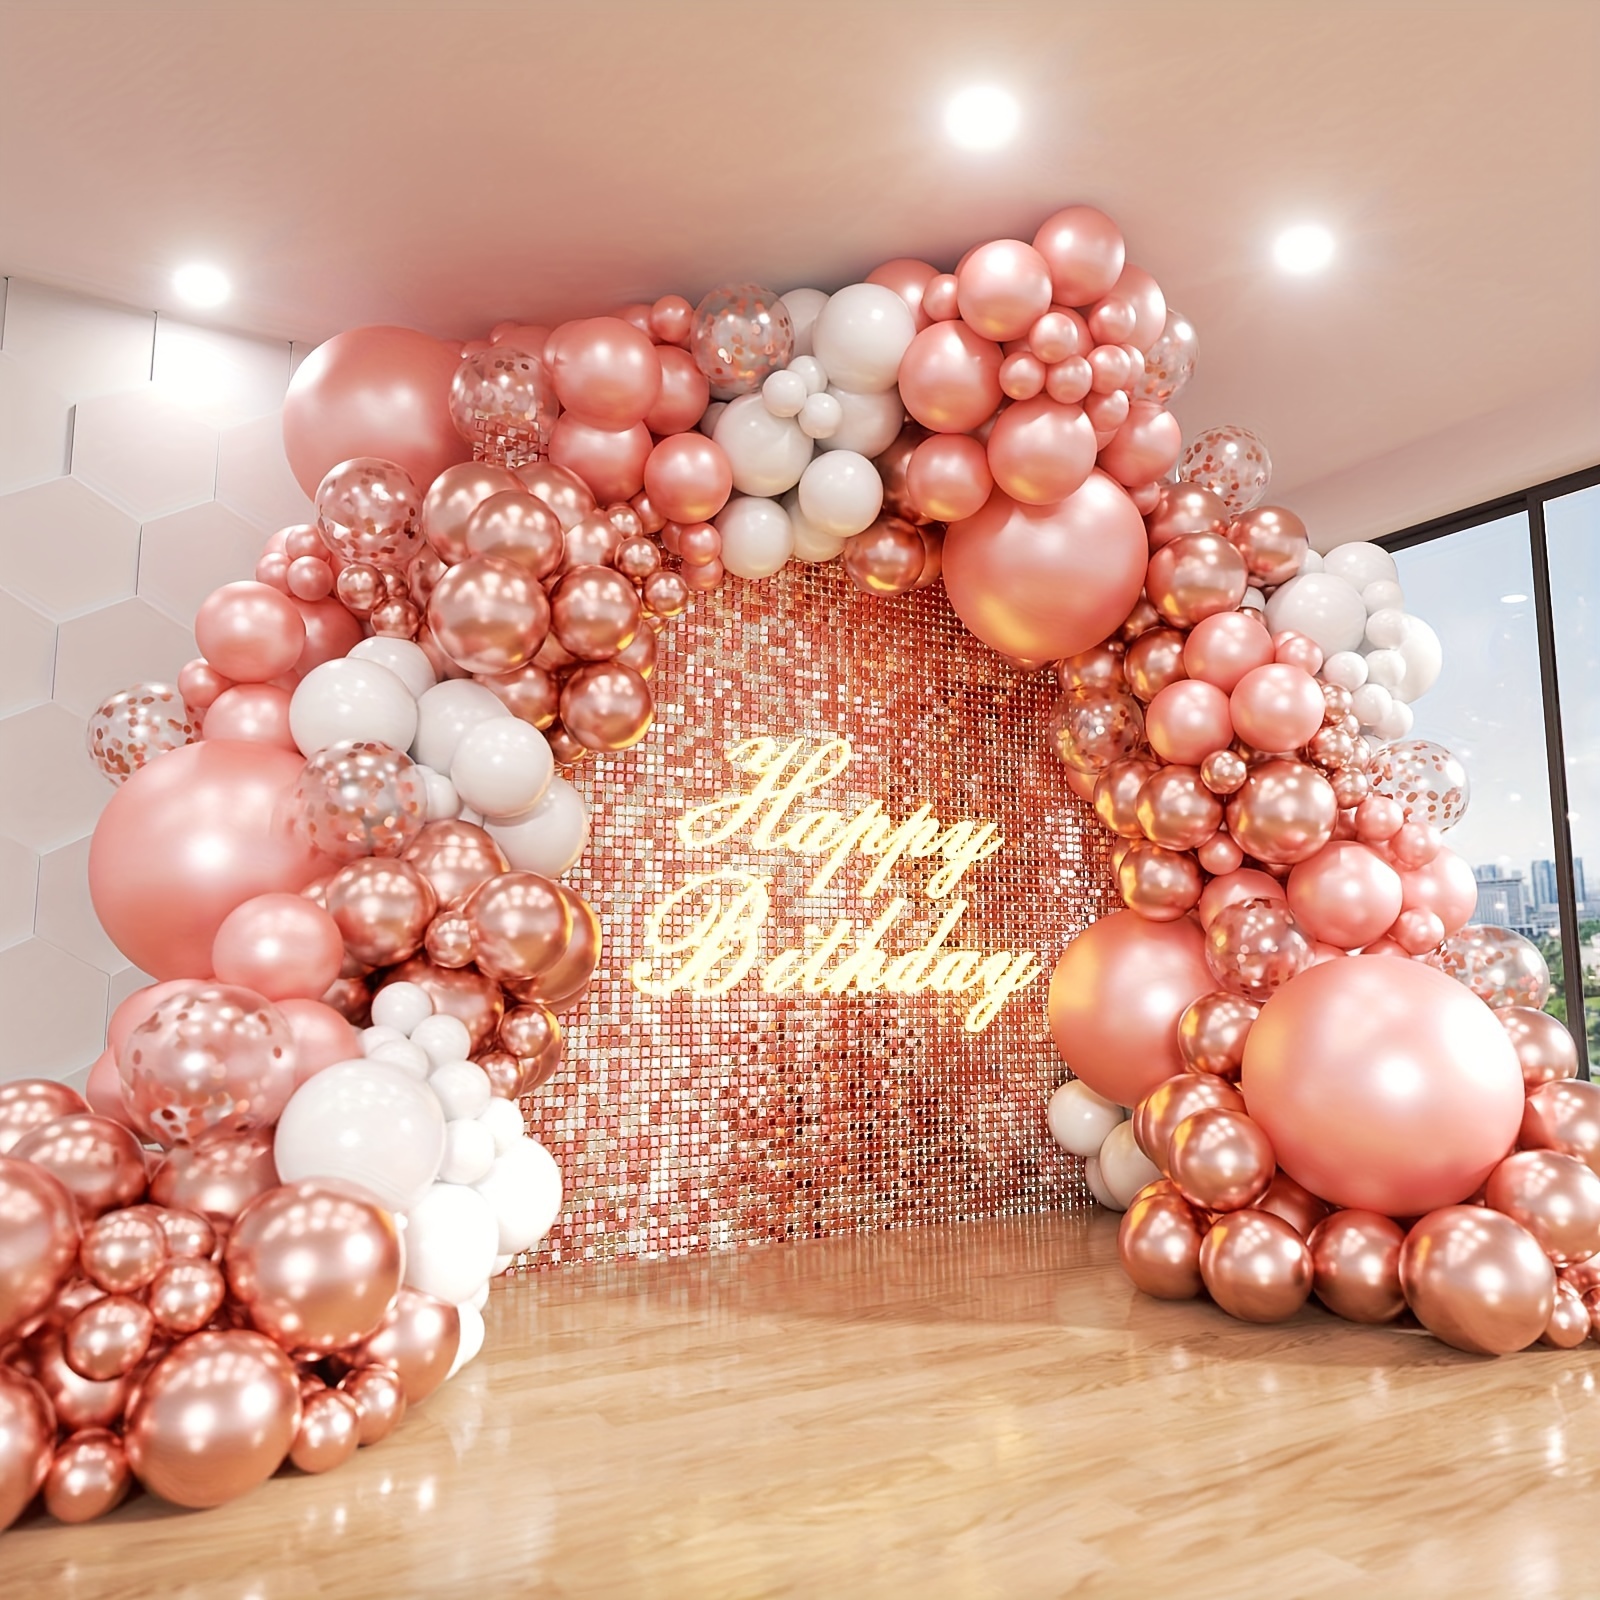 

124-piece Rose Golden Balloon Arch Kit - Assorted Sizes For Birthday, Wedding, Bridal Shower, Valentine's Day & More - Elegant Party Decorations